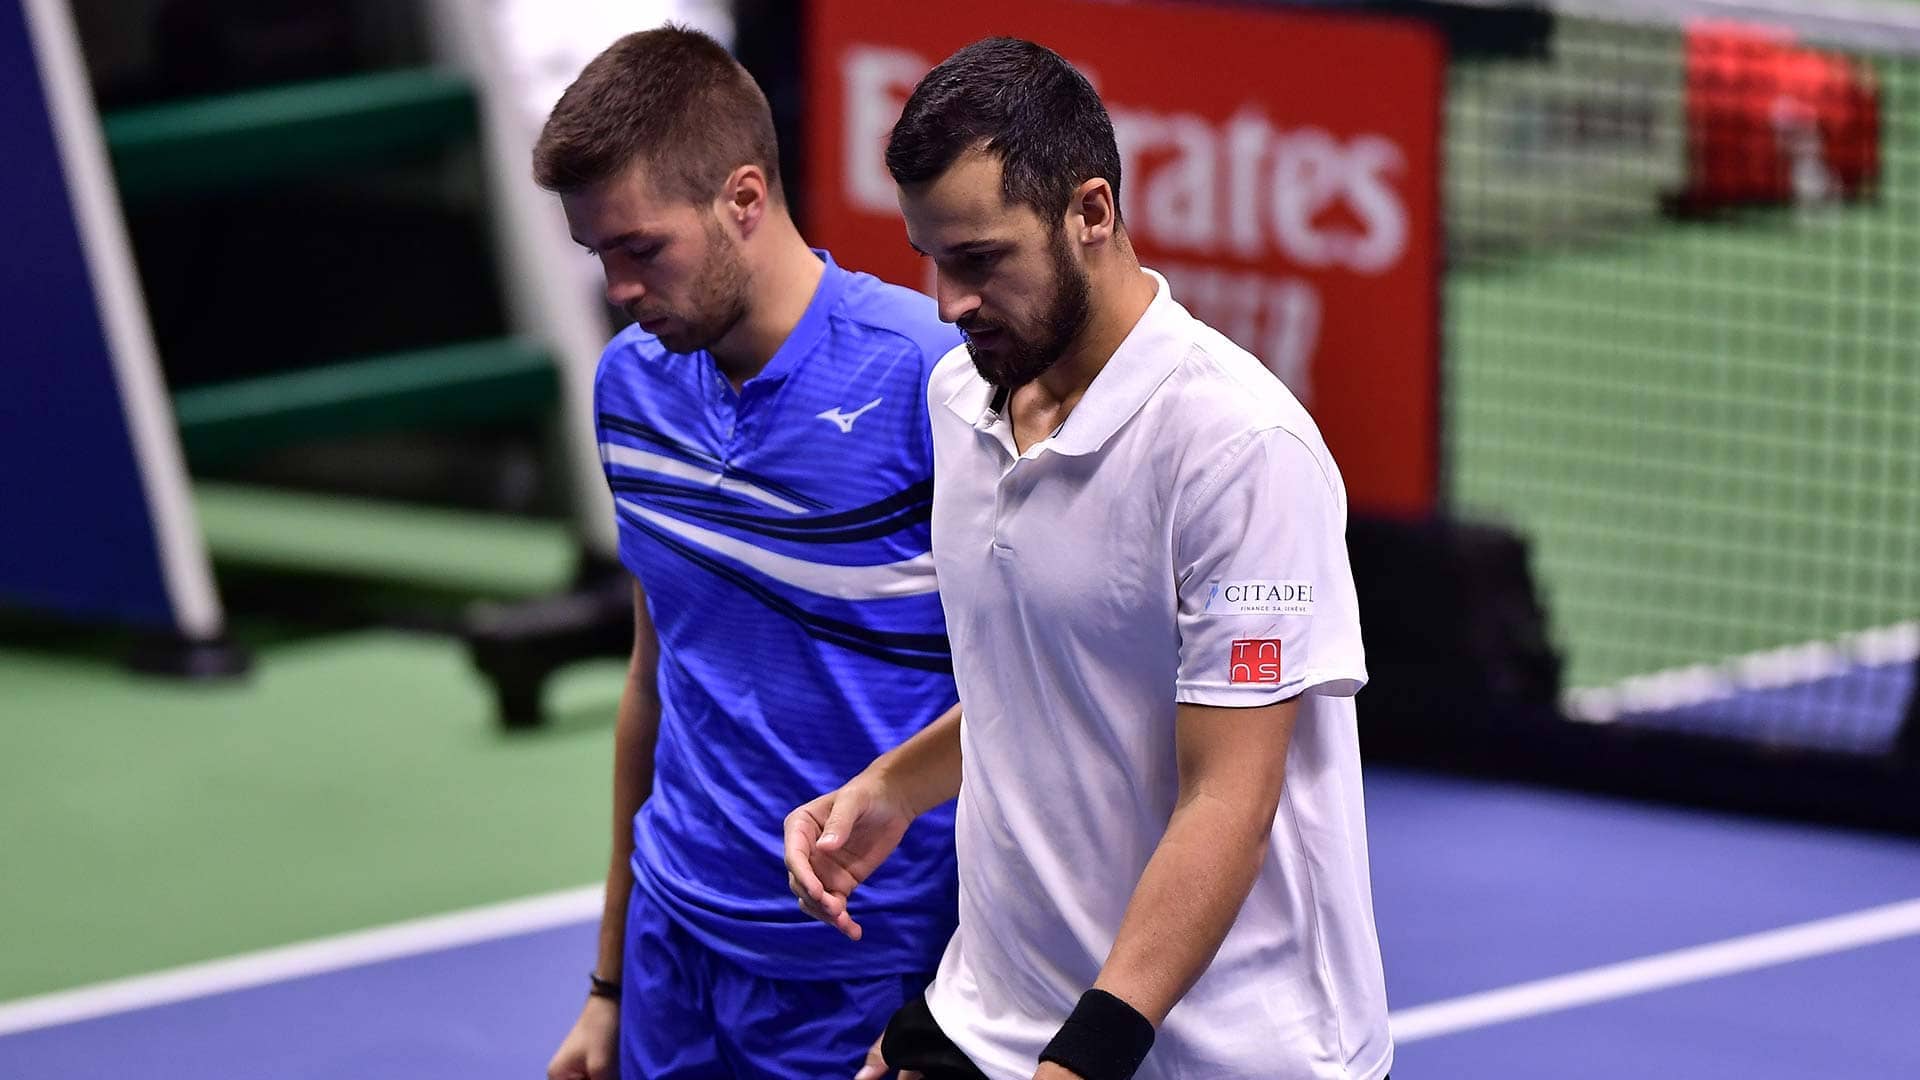 Nikola Mektic and Mate Pavic in action on Friday in Astana.